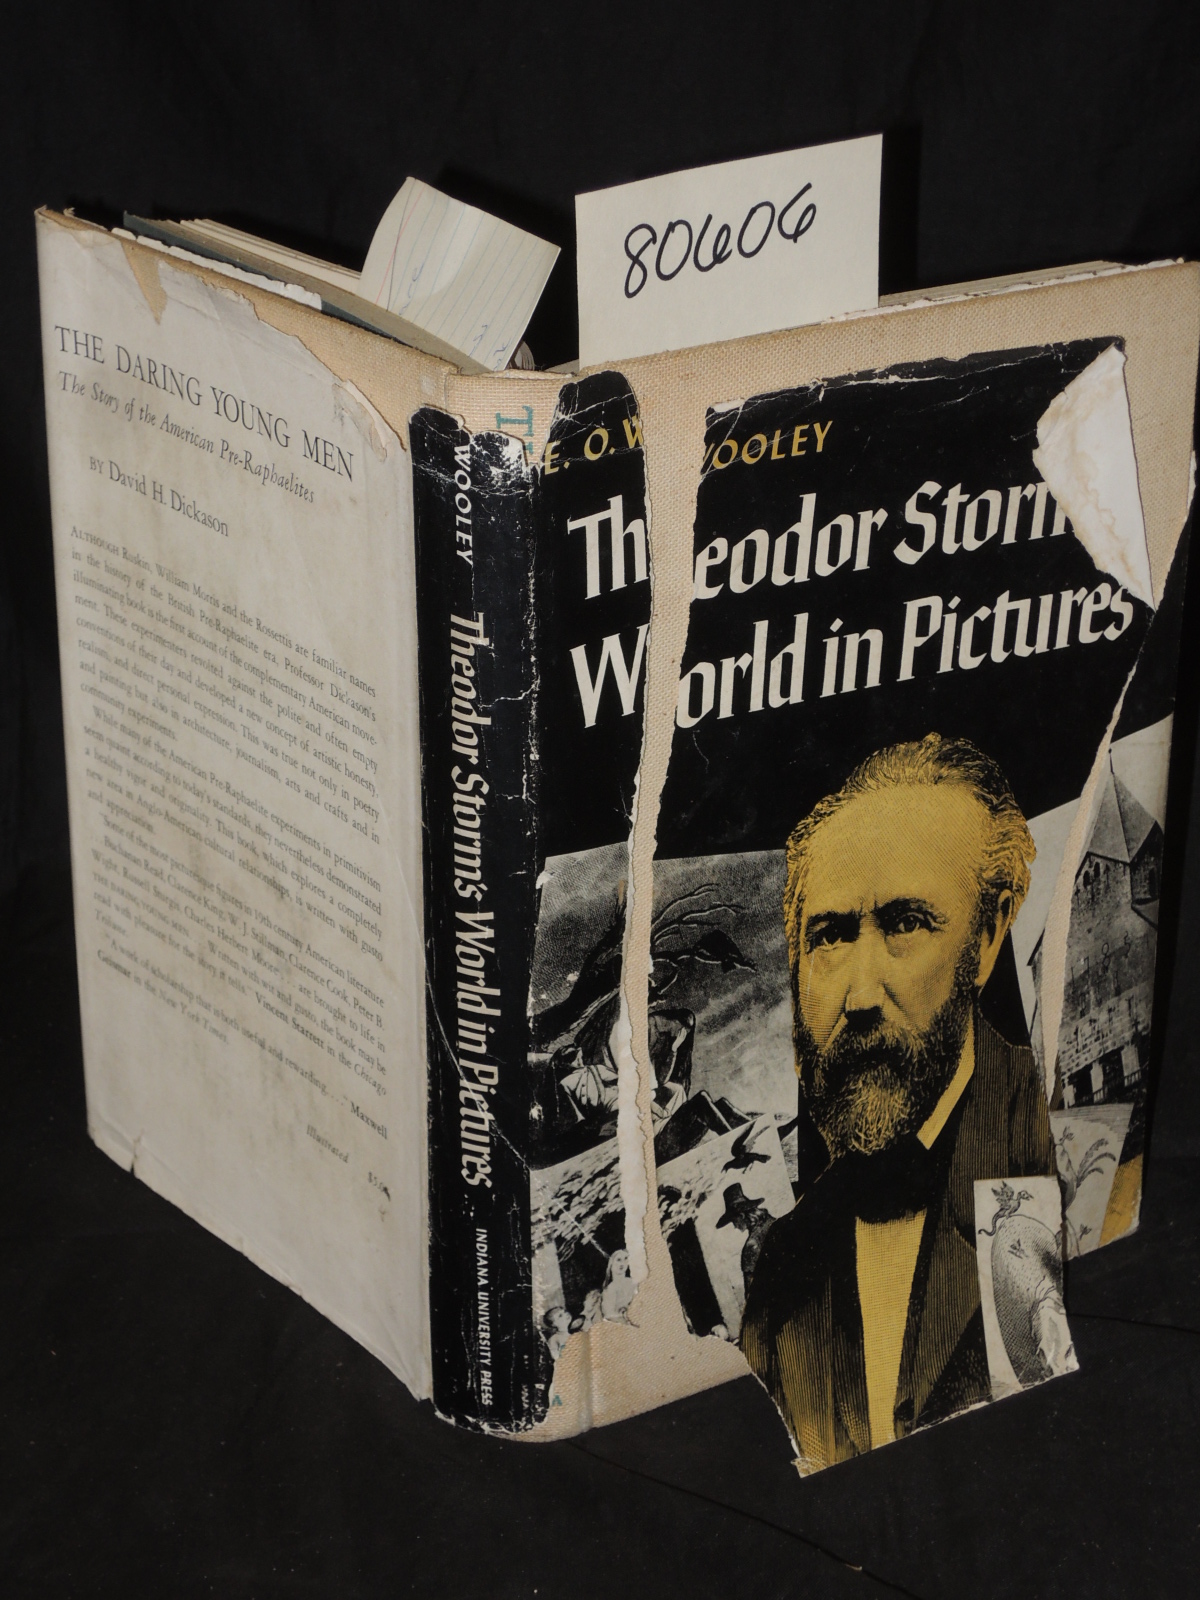 Wooley, E.O.: Theodor Storm's World In Pictures